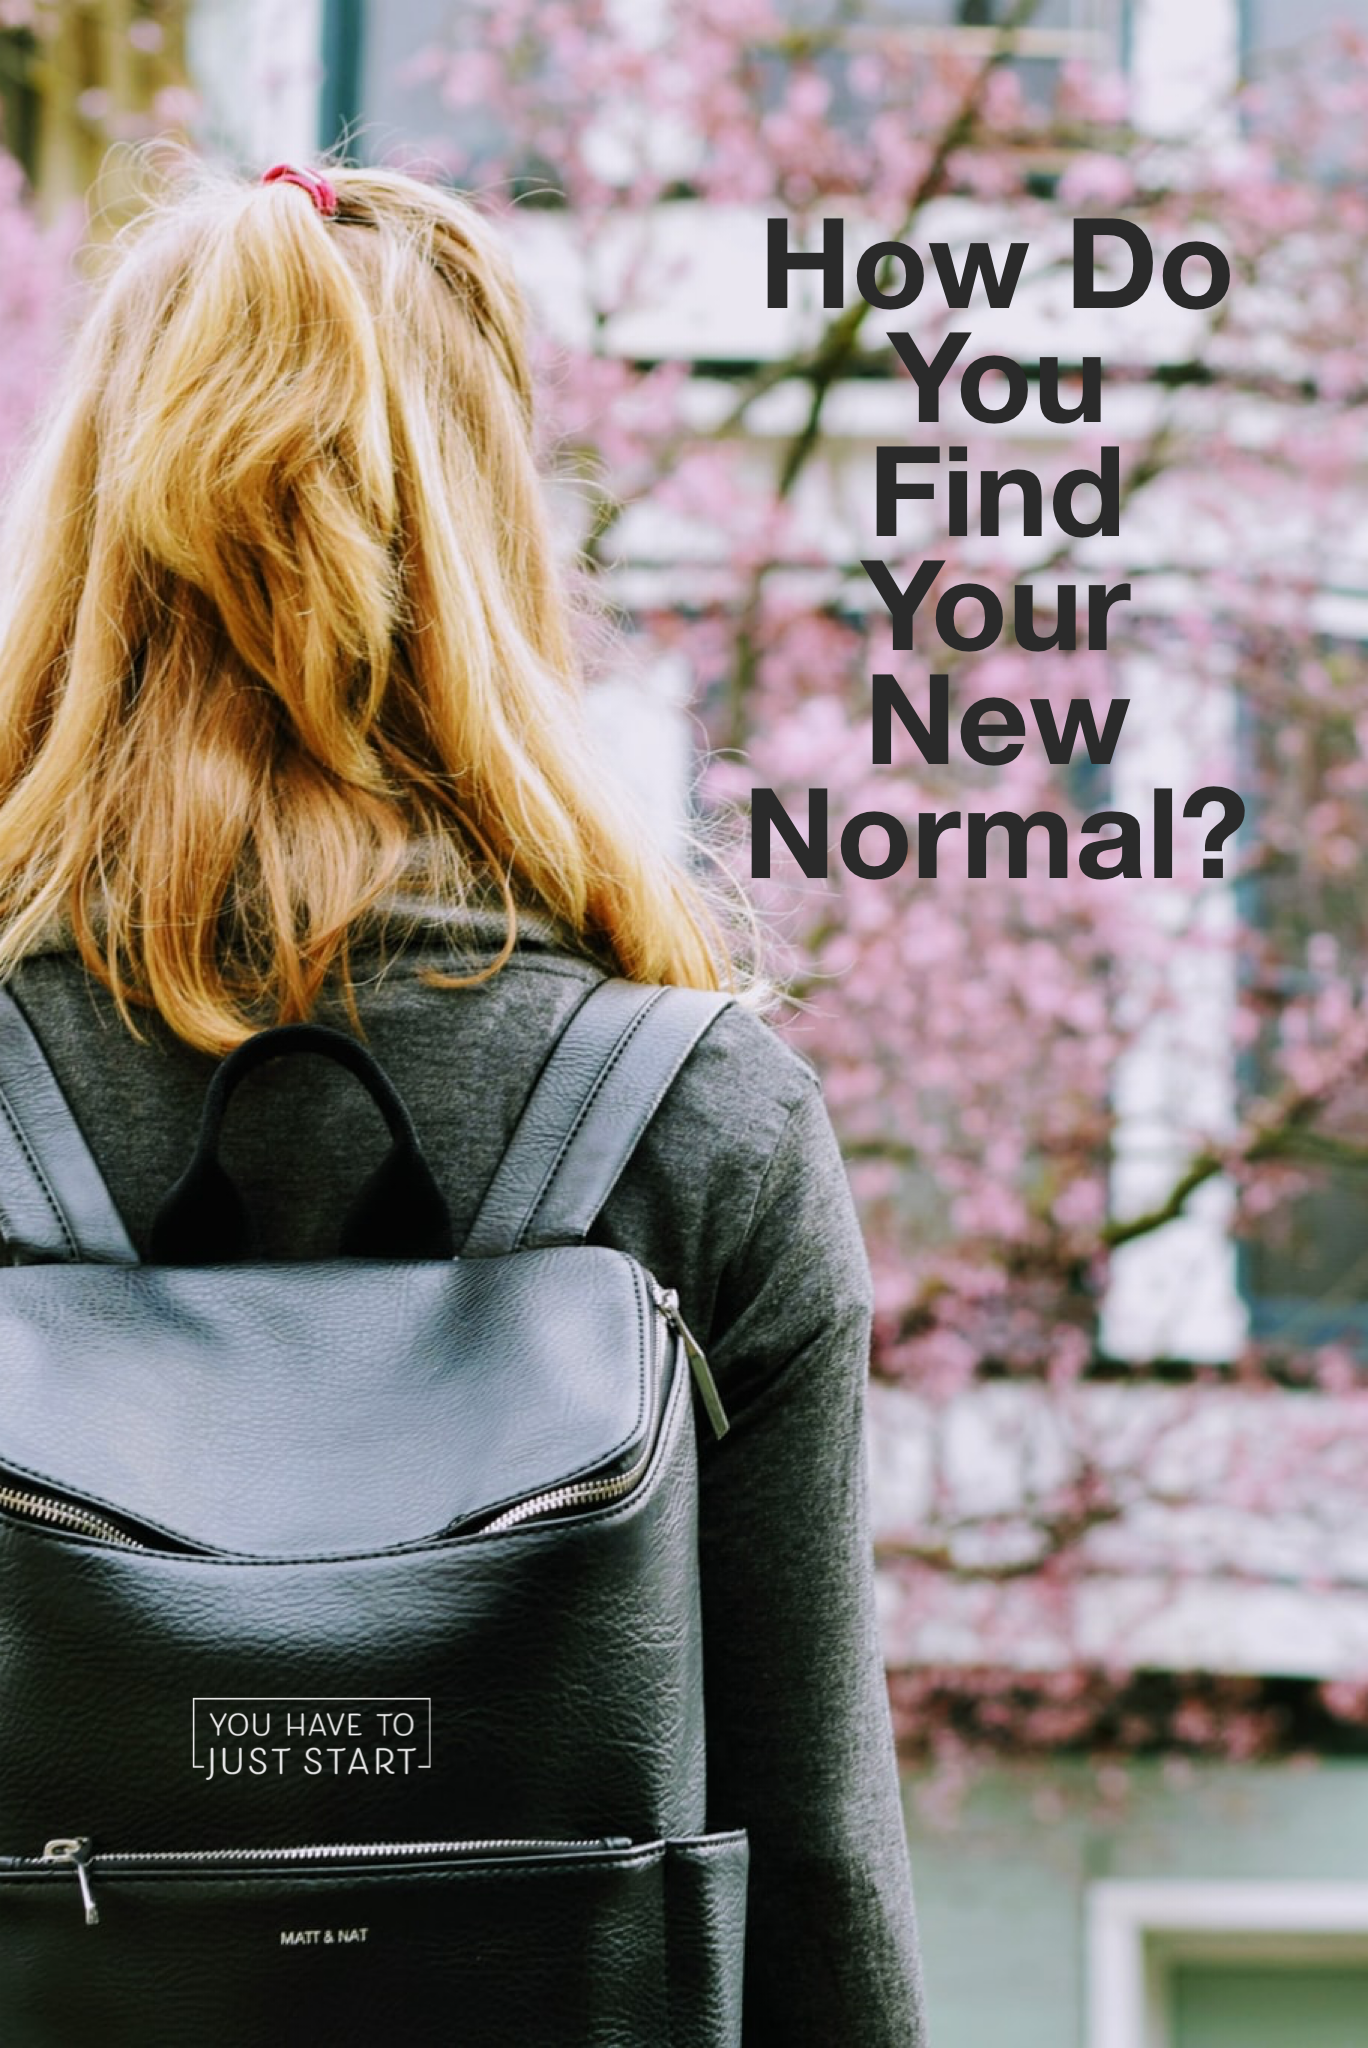 How Do You Find Your New Normal?